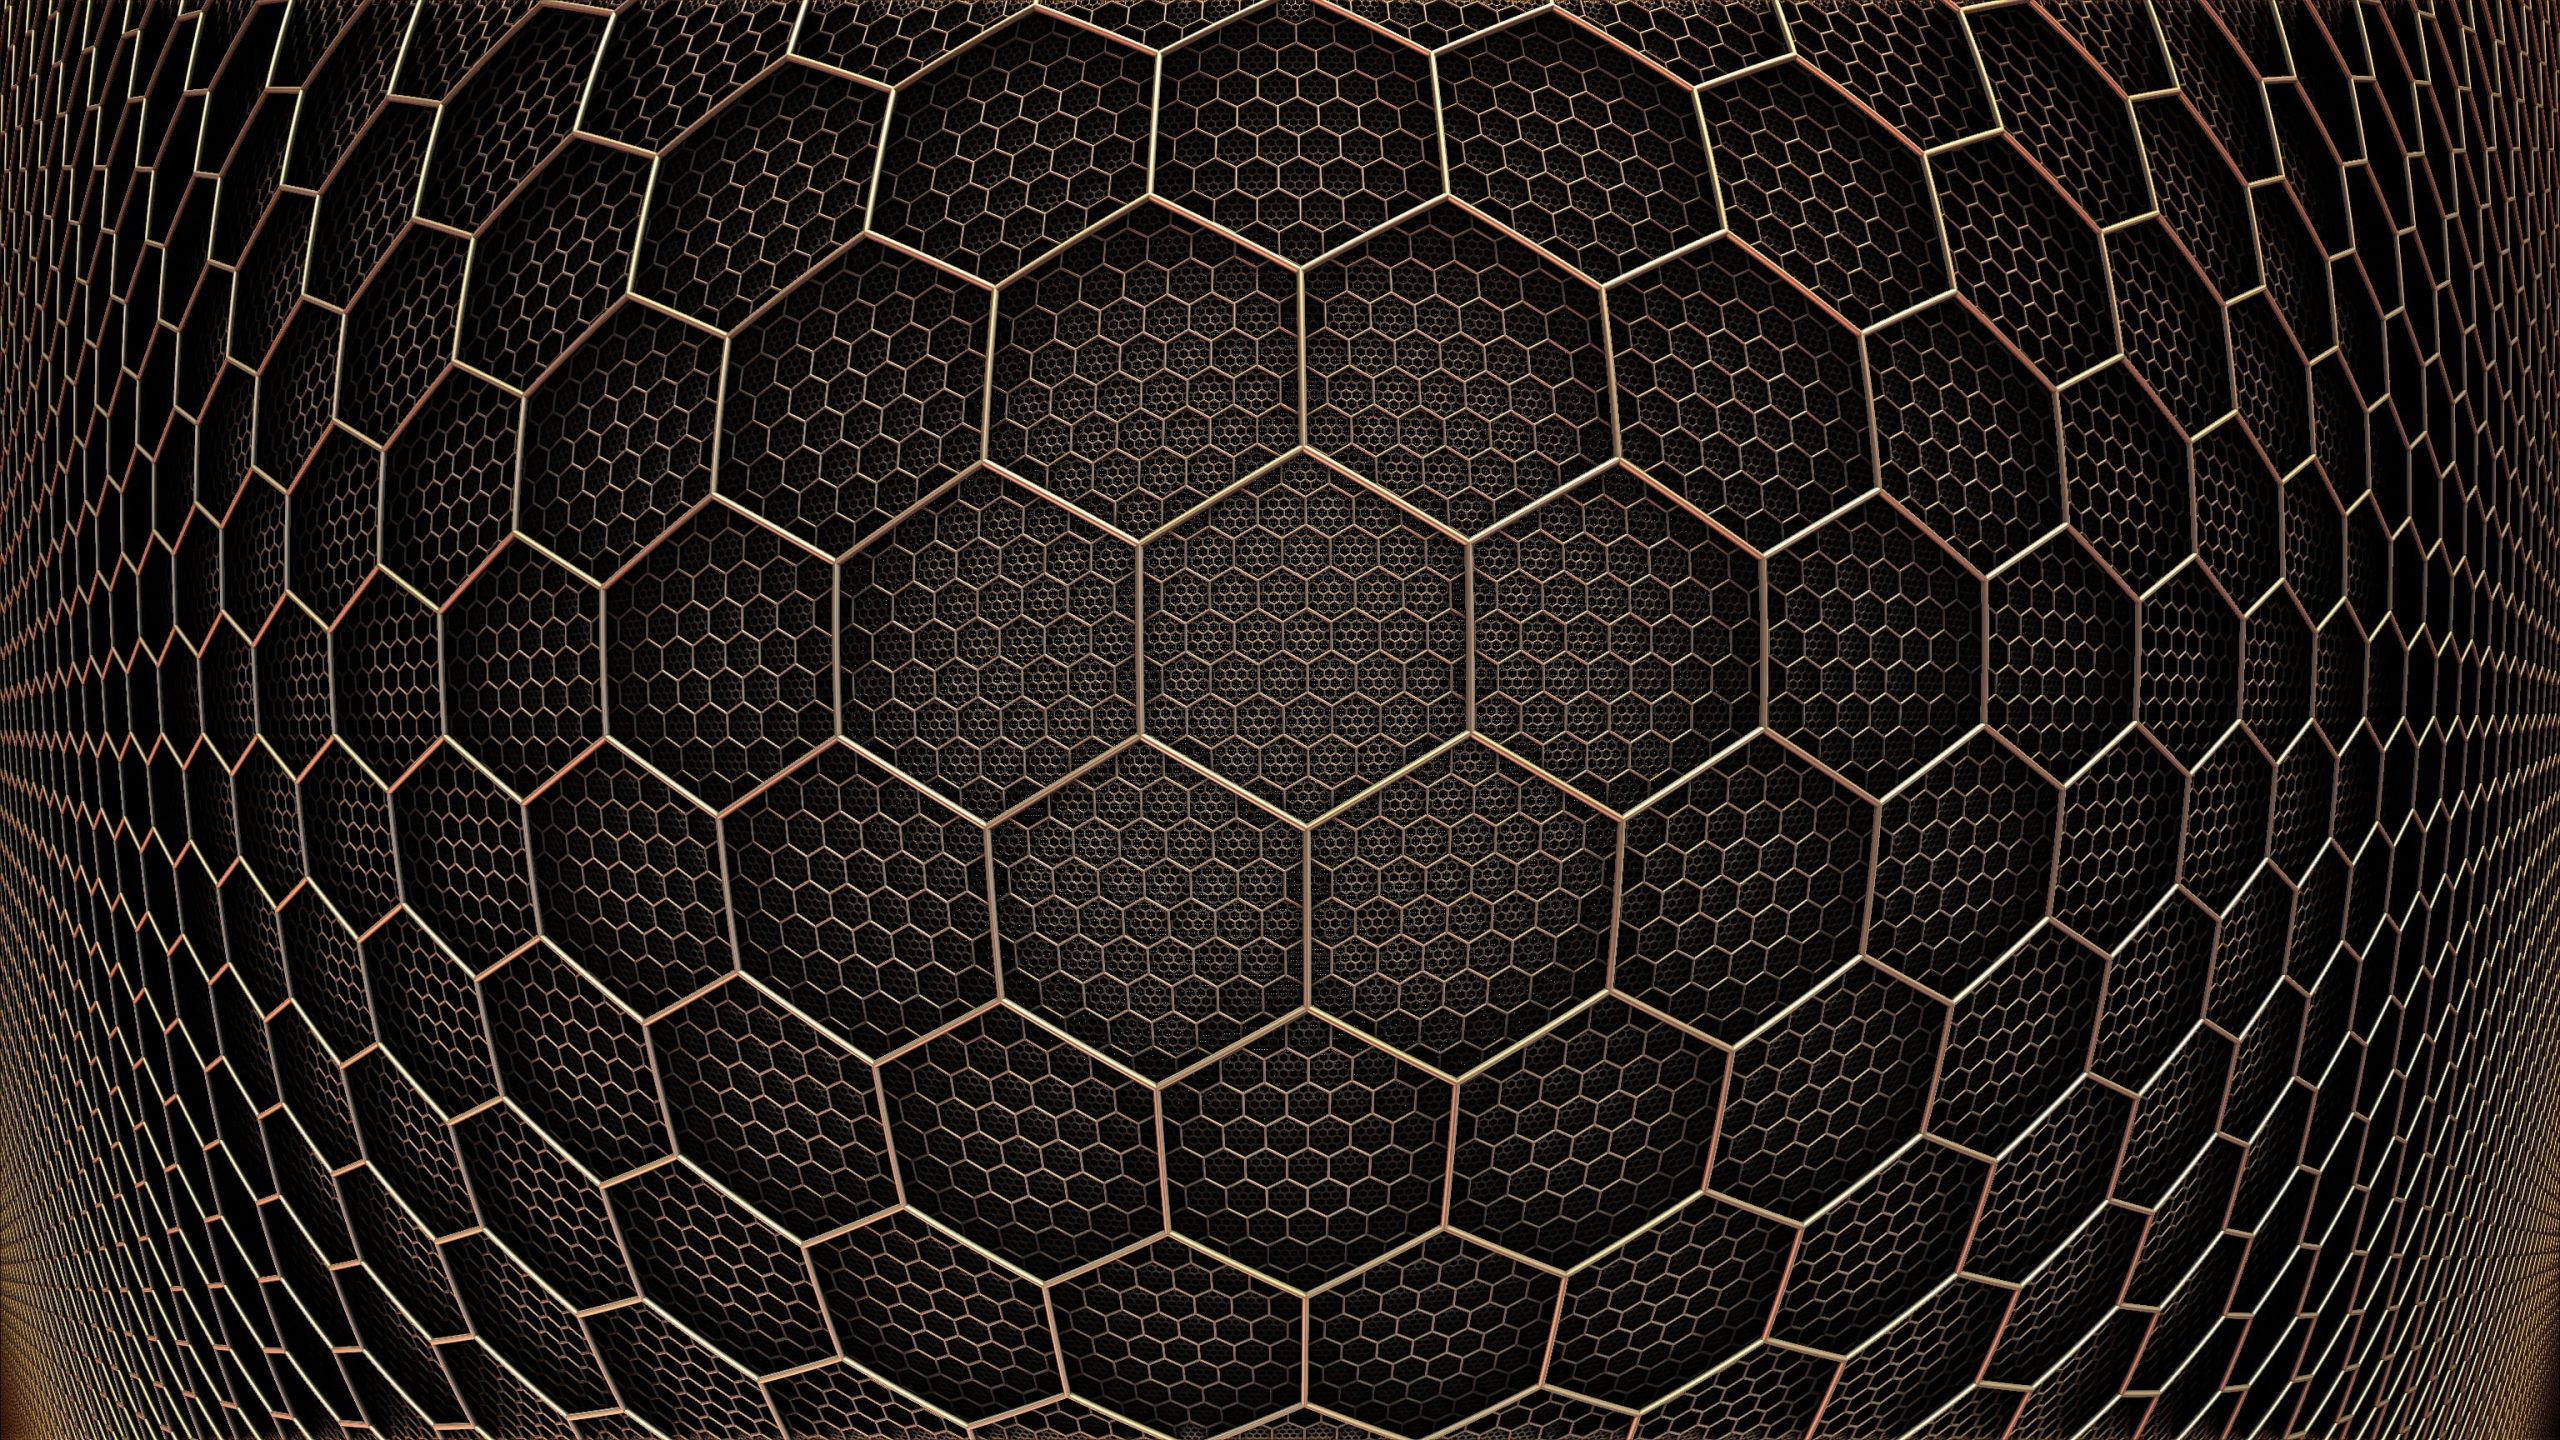 Black and white area rug wallpaper, abstract, hexagon, 3d design